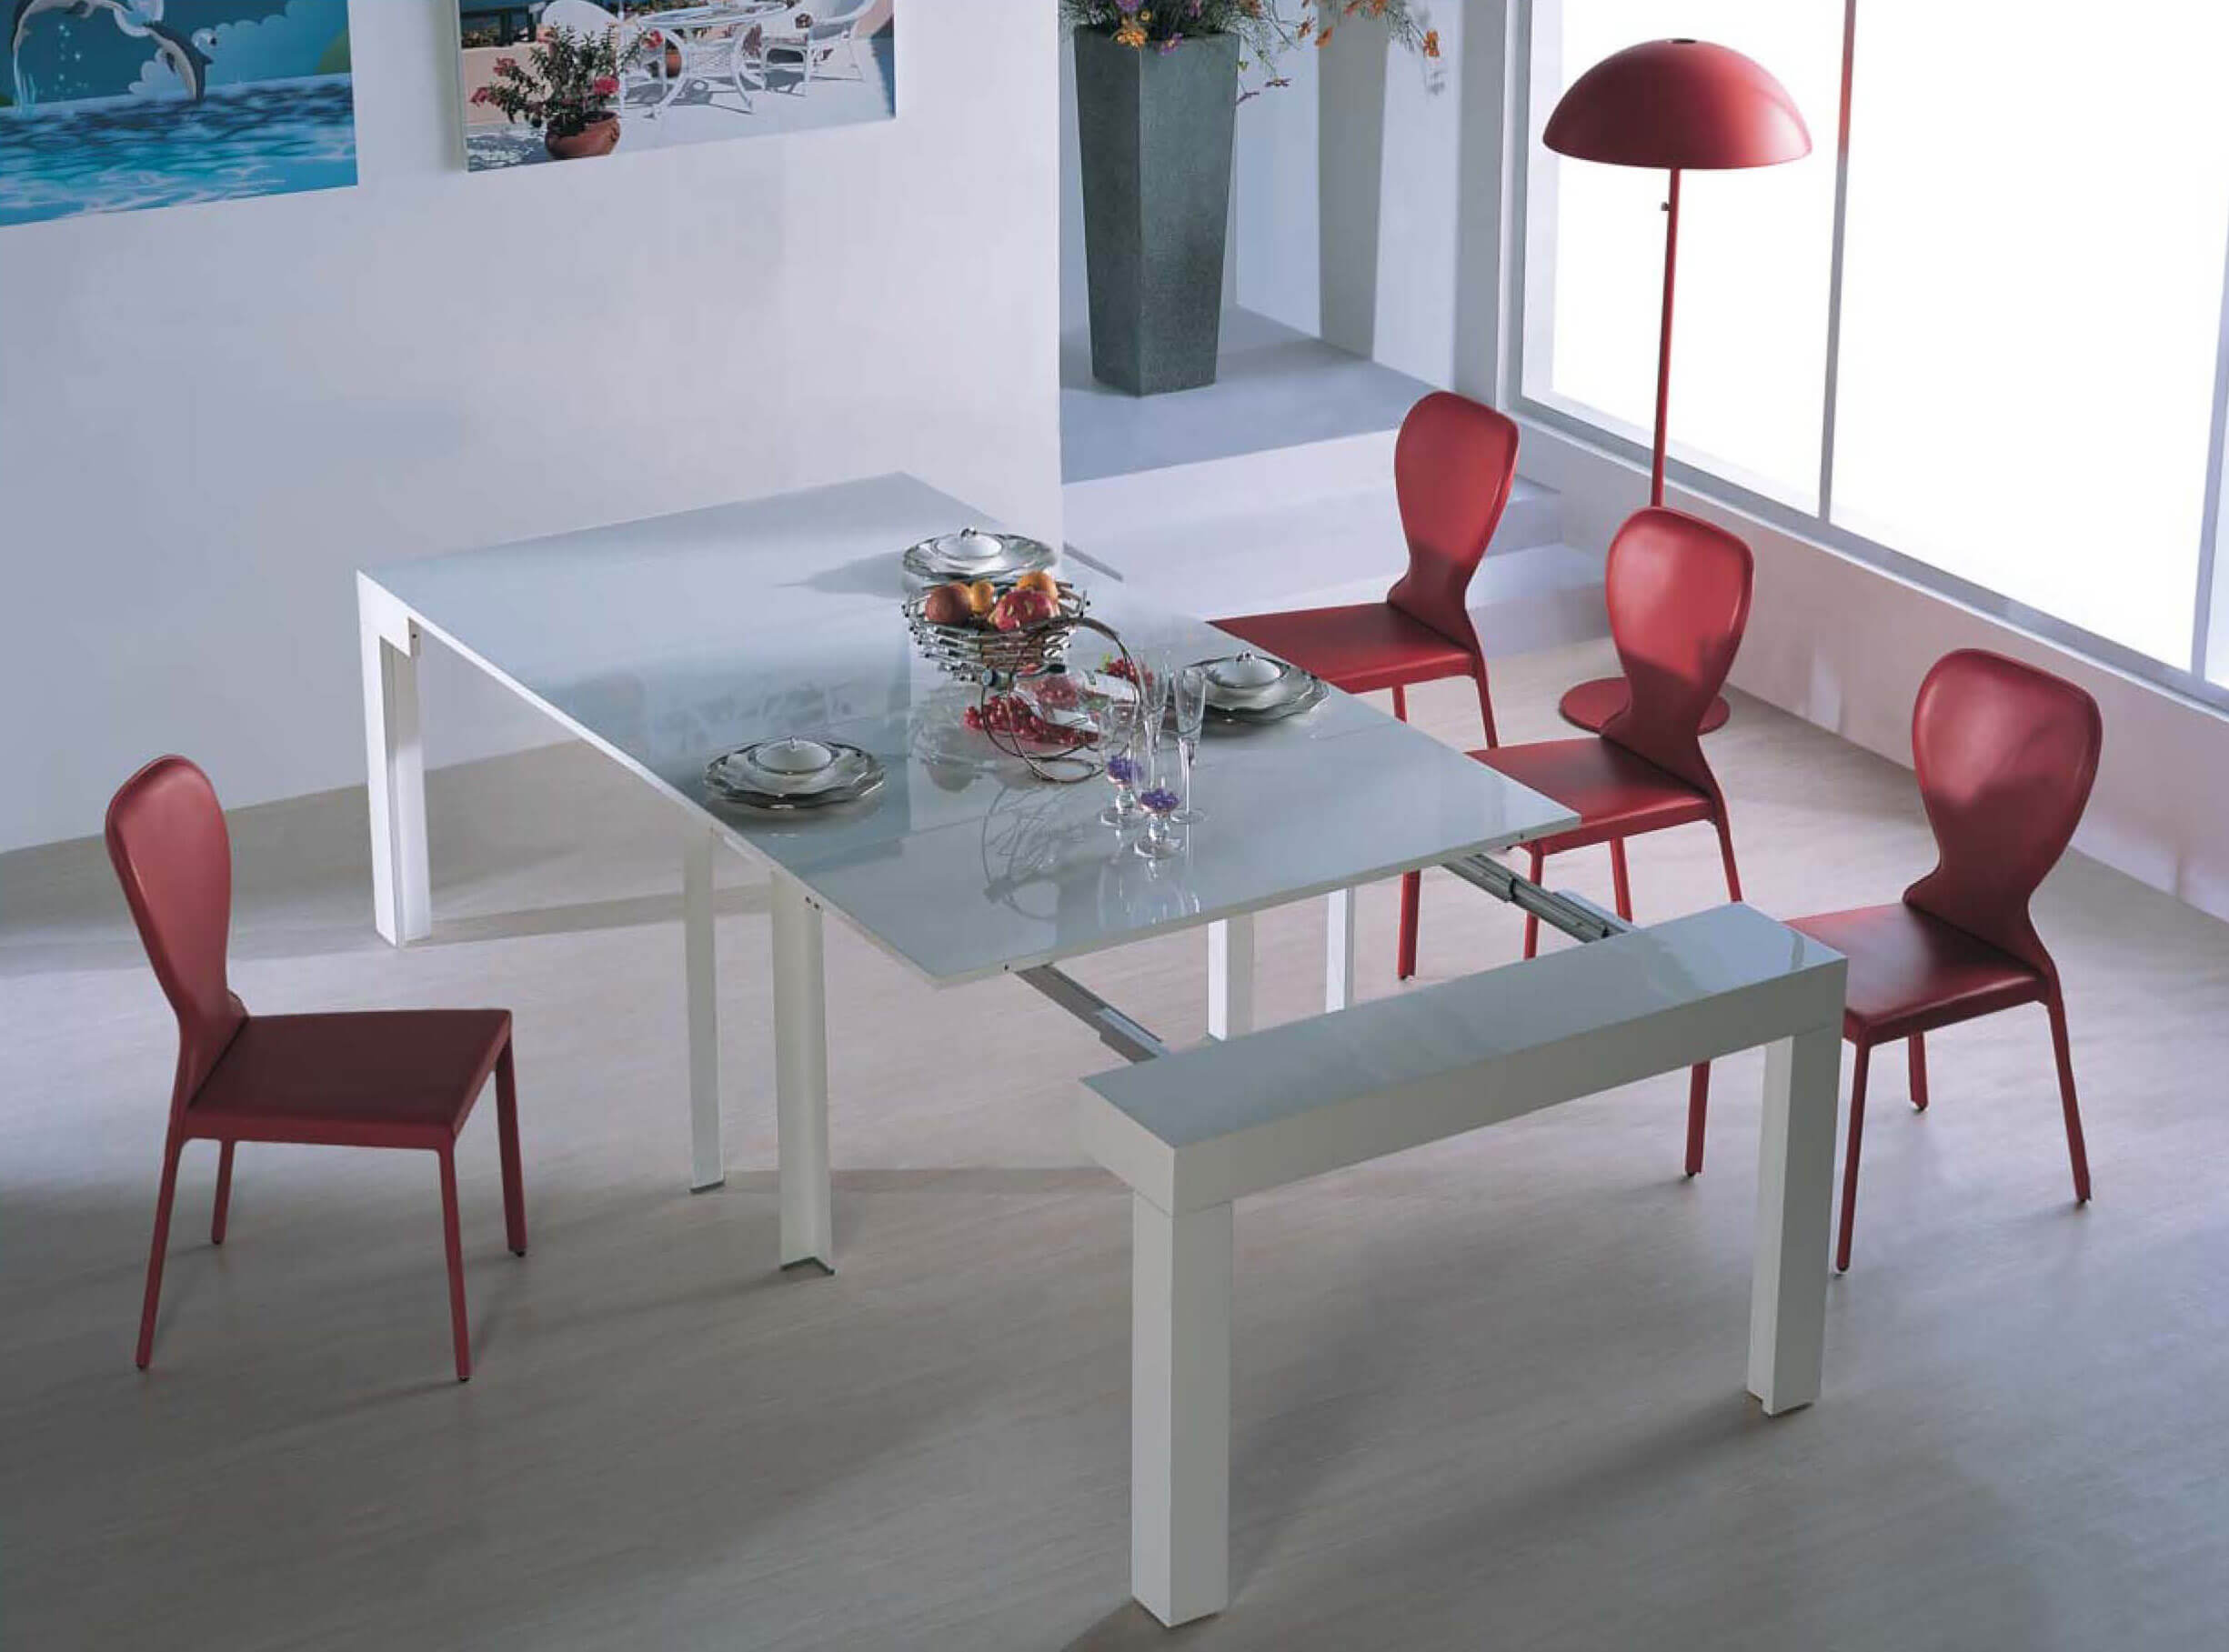 Expandable Dining Tables: Looking For Best Design?